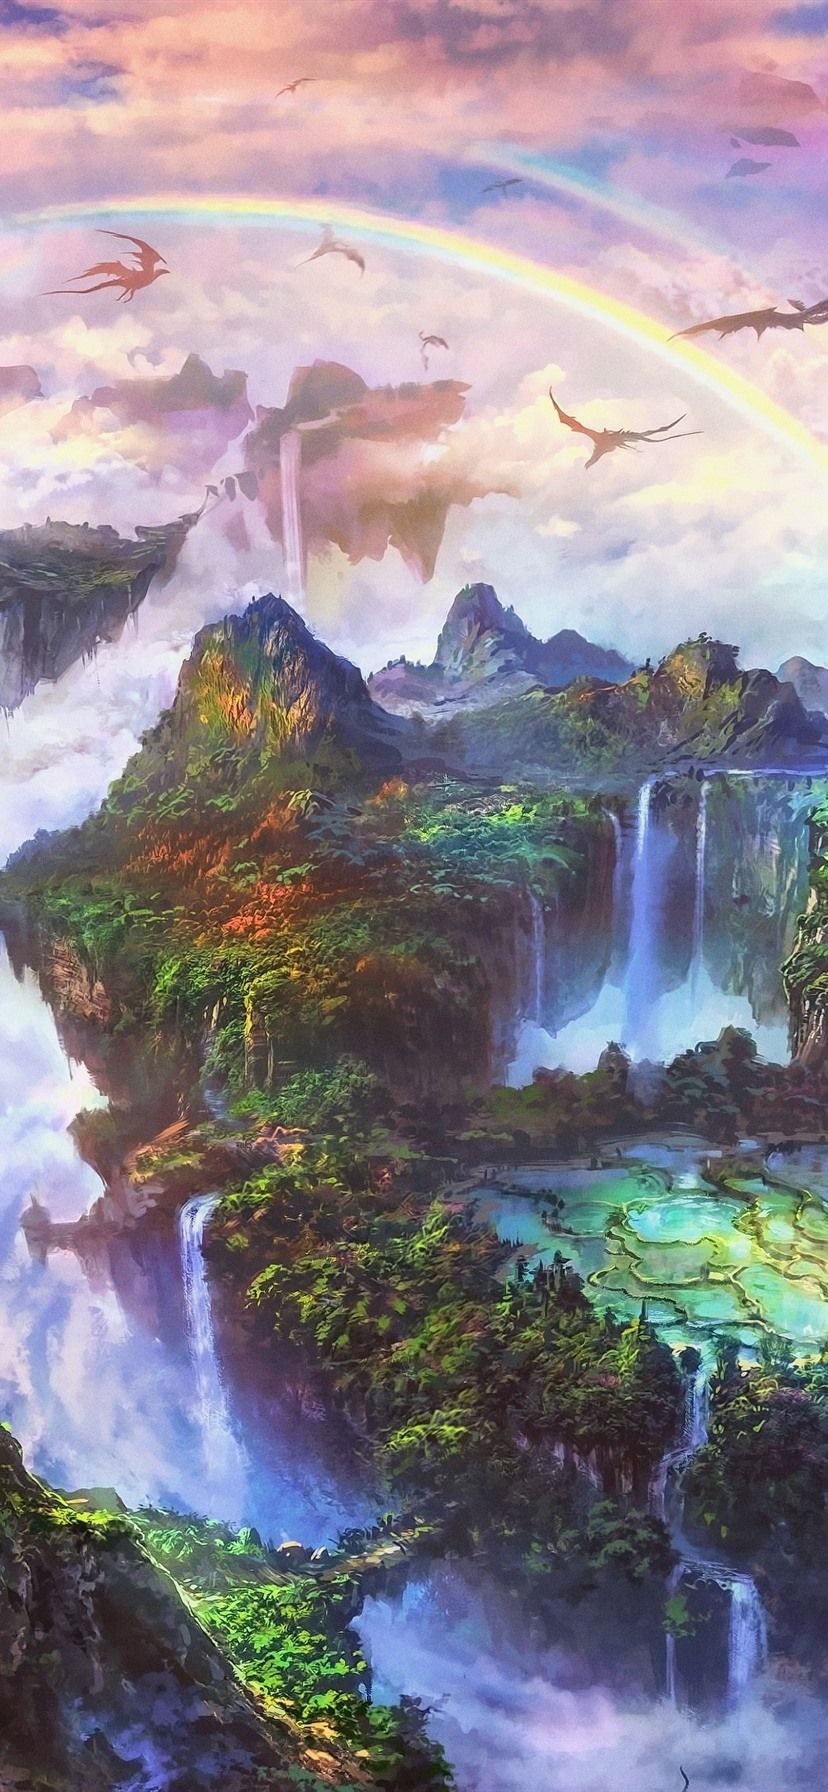 Beautiful Fantasy World, Rainbow, Dragon, Mountains, Waterfall 1080x1920 IPhone 8 7 6 6S Plus Wallpaper, Background, Picture, Image